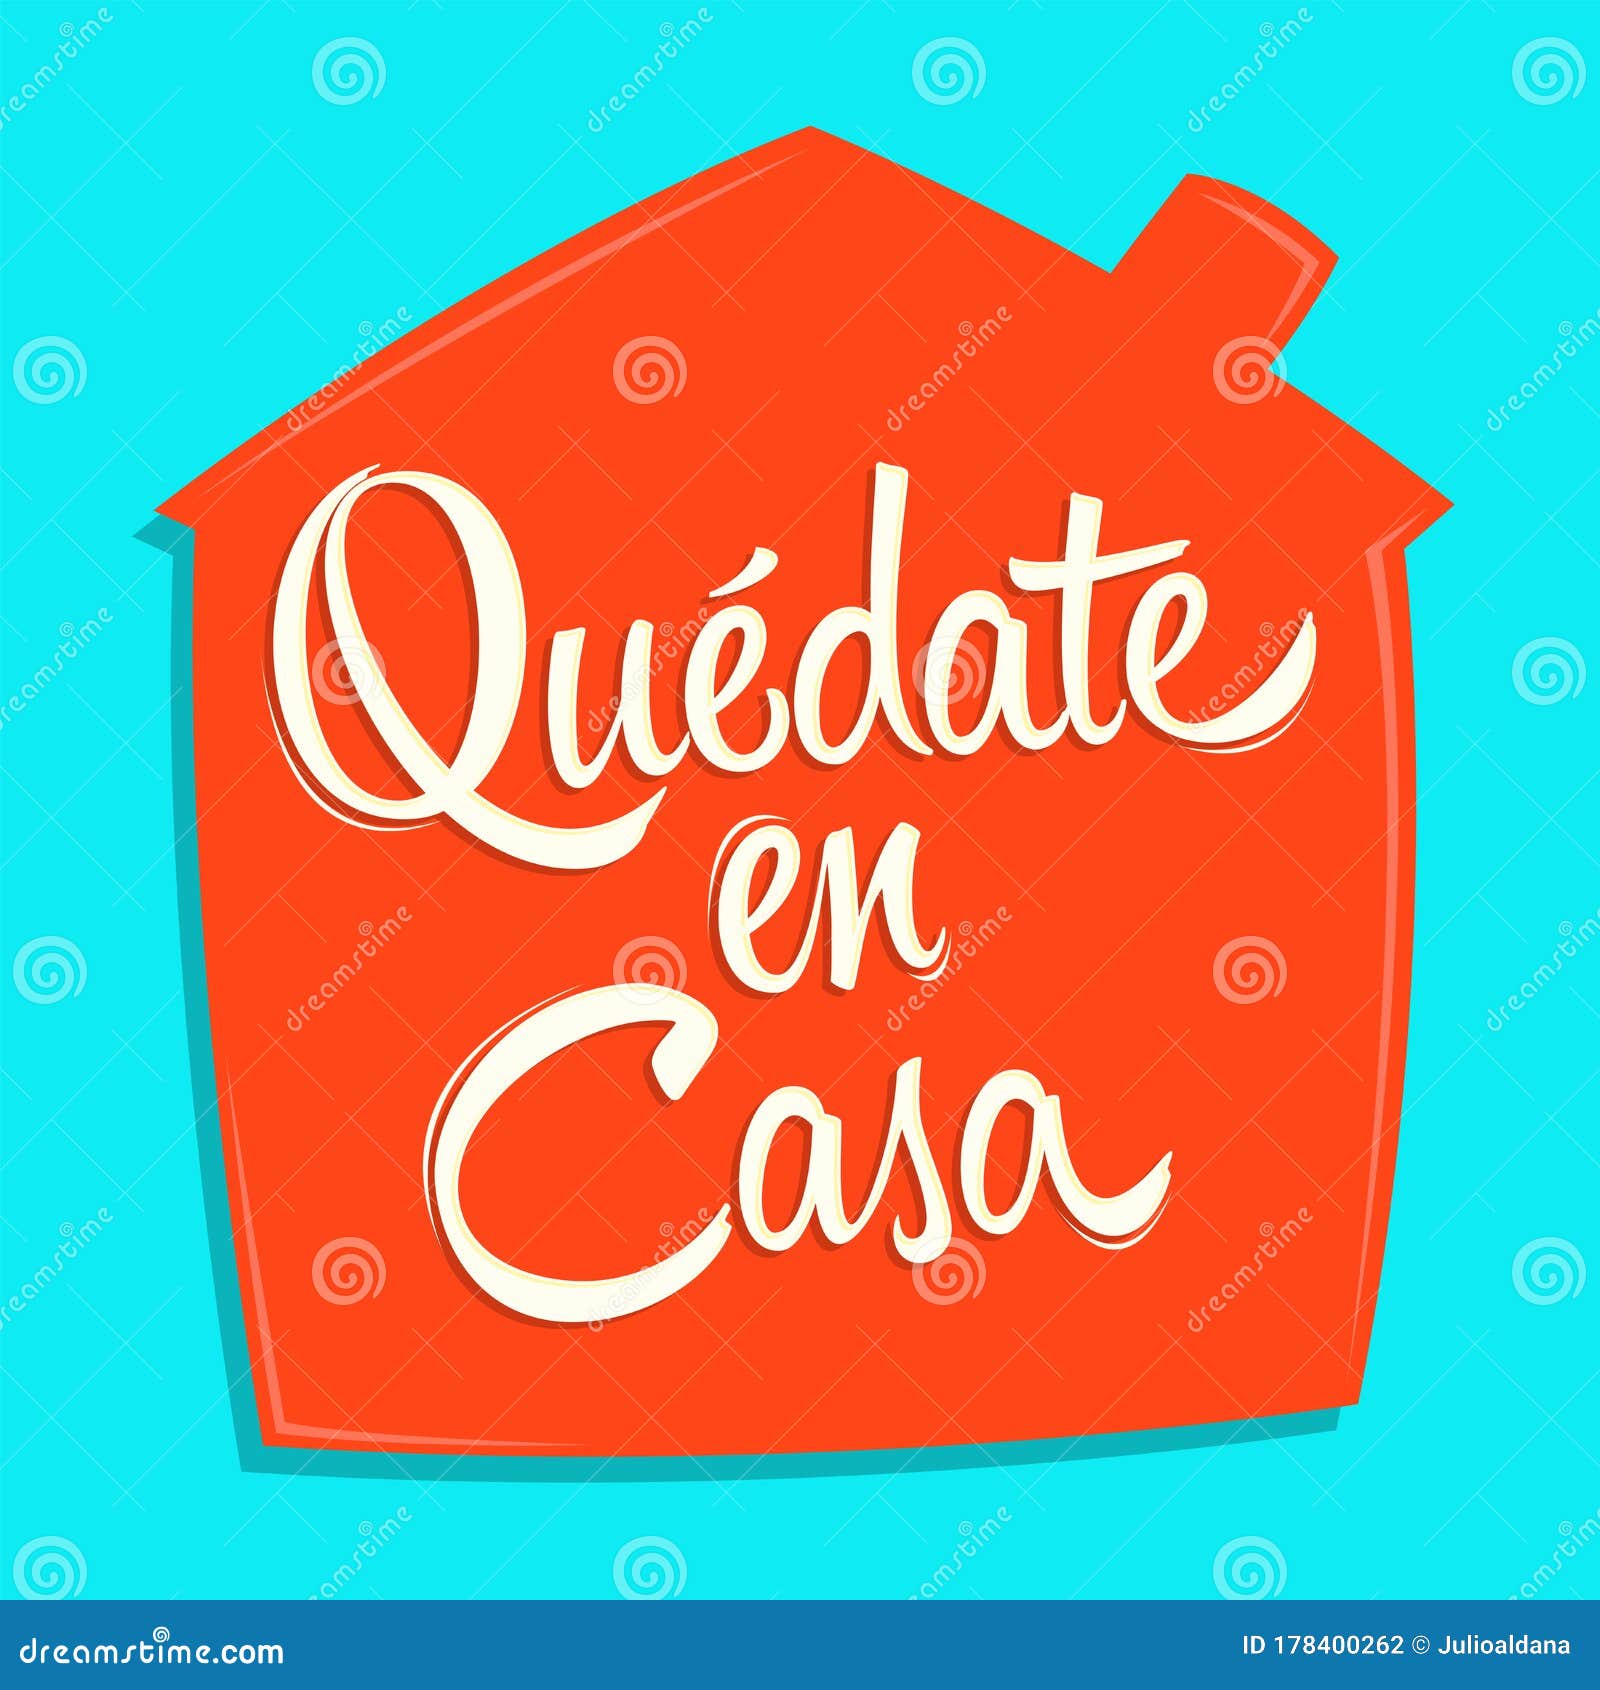 quedate en casa, stay at home spanish text  .